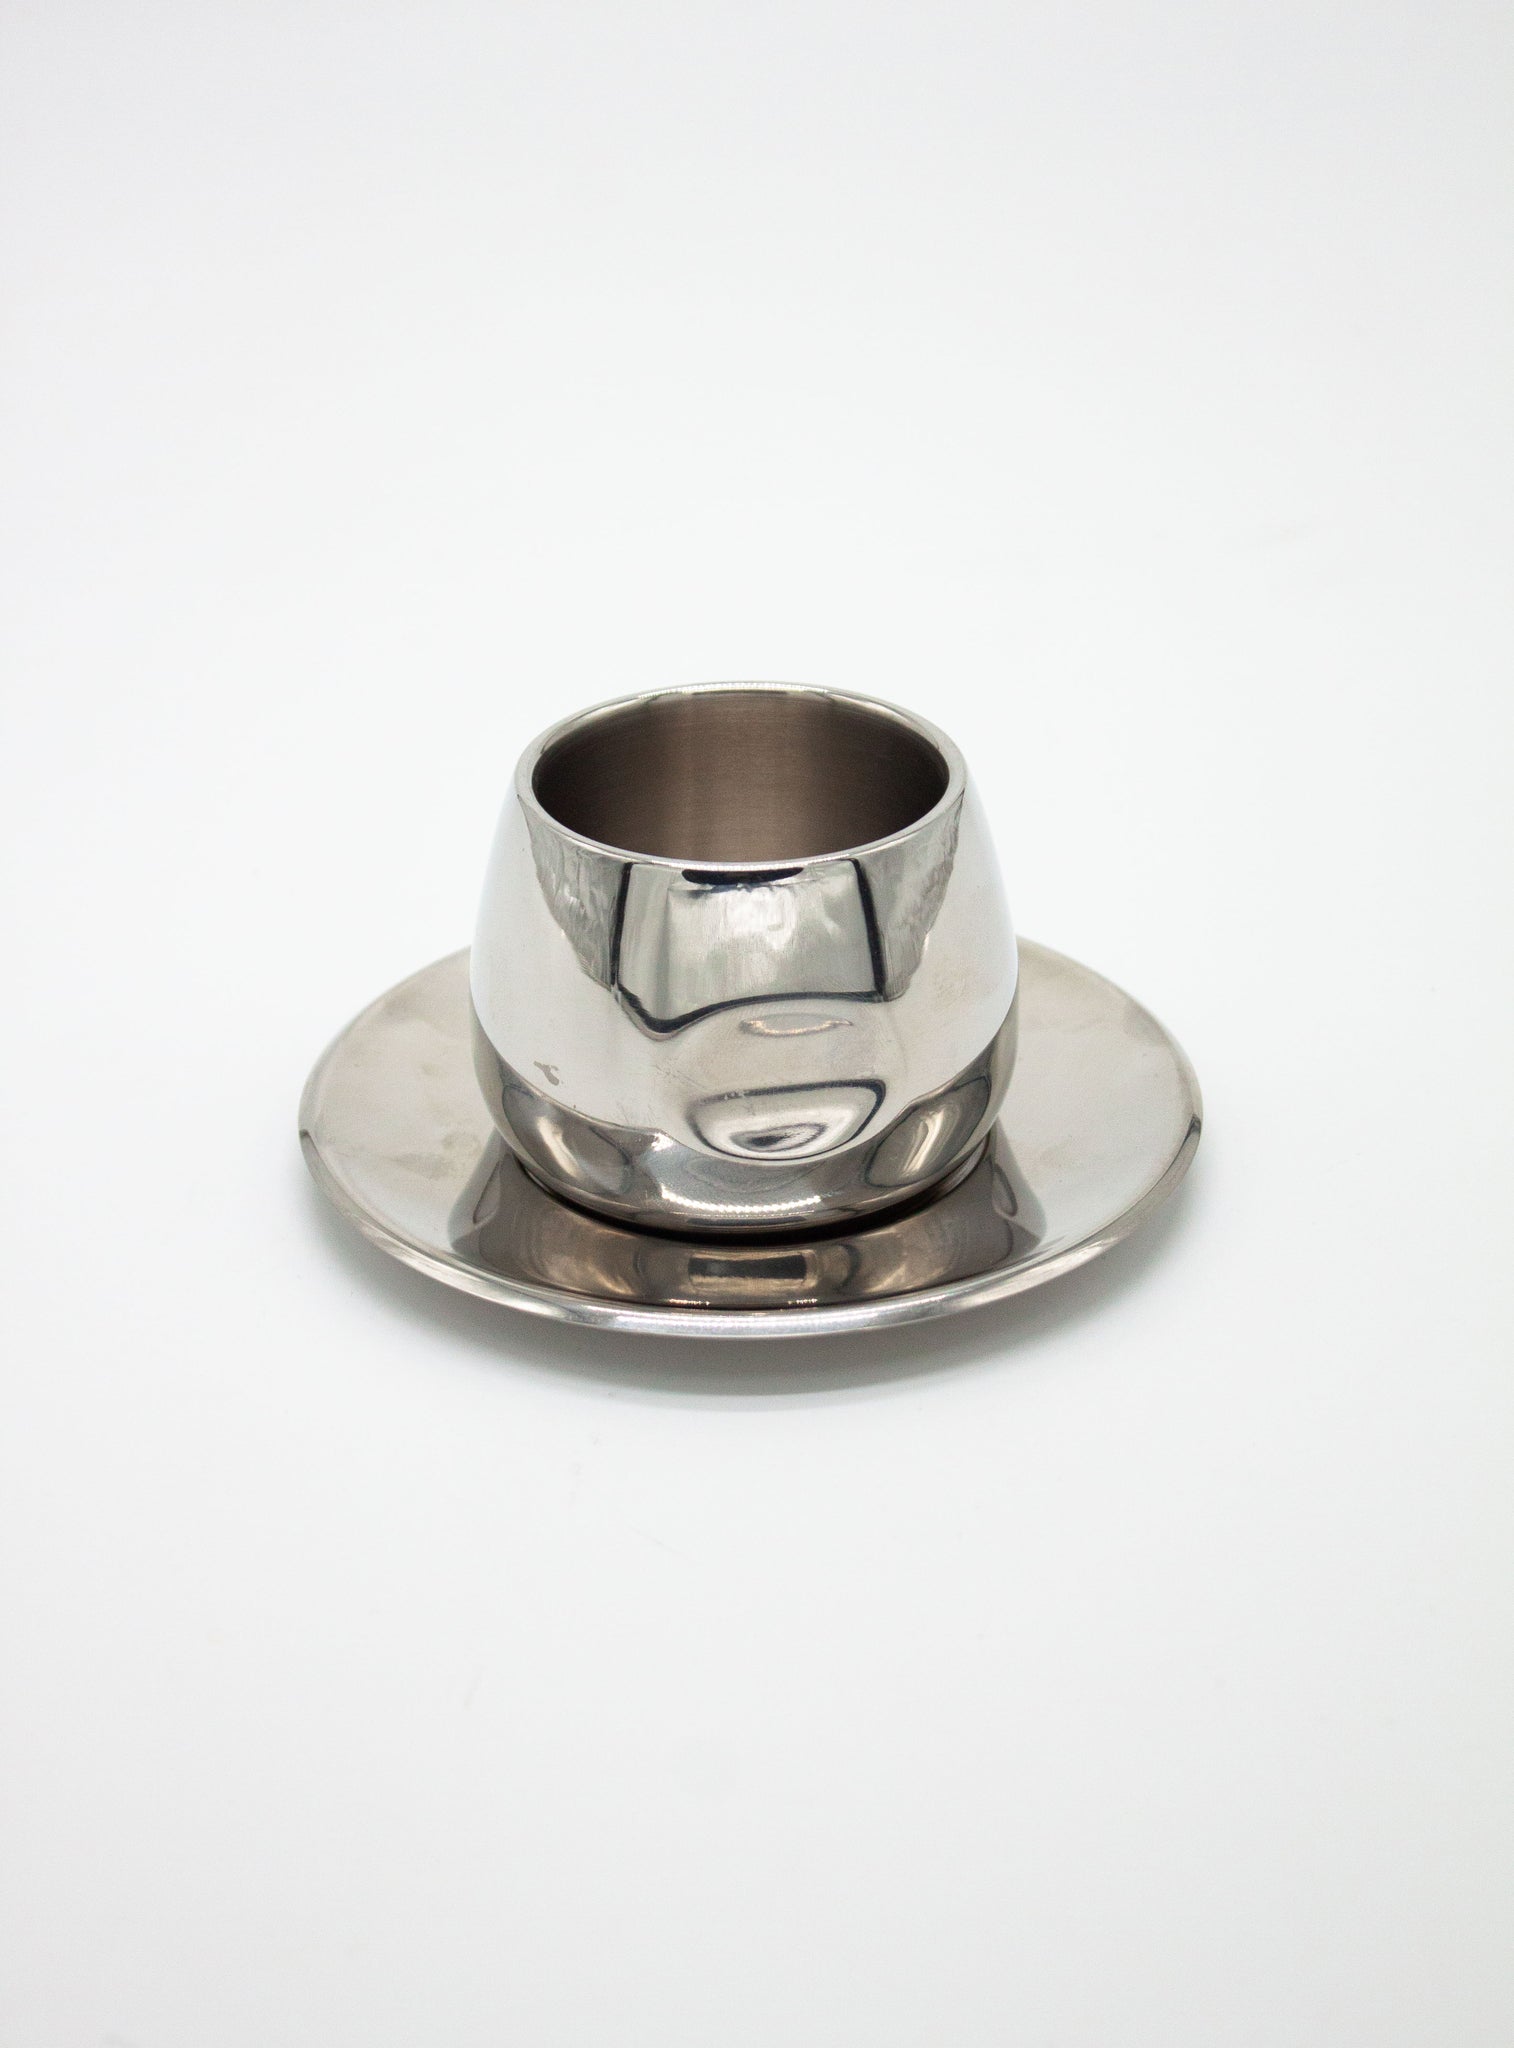 AMC Italy Stainless Steel Coffee Cup & Saucer